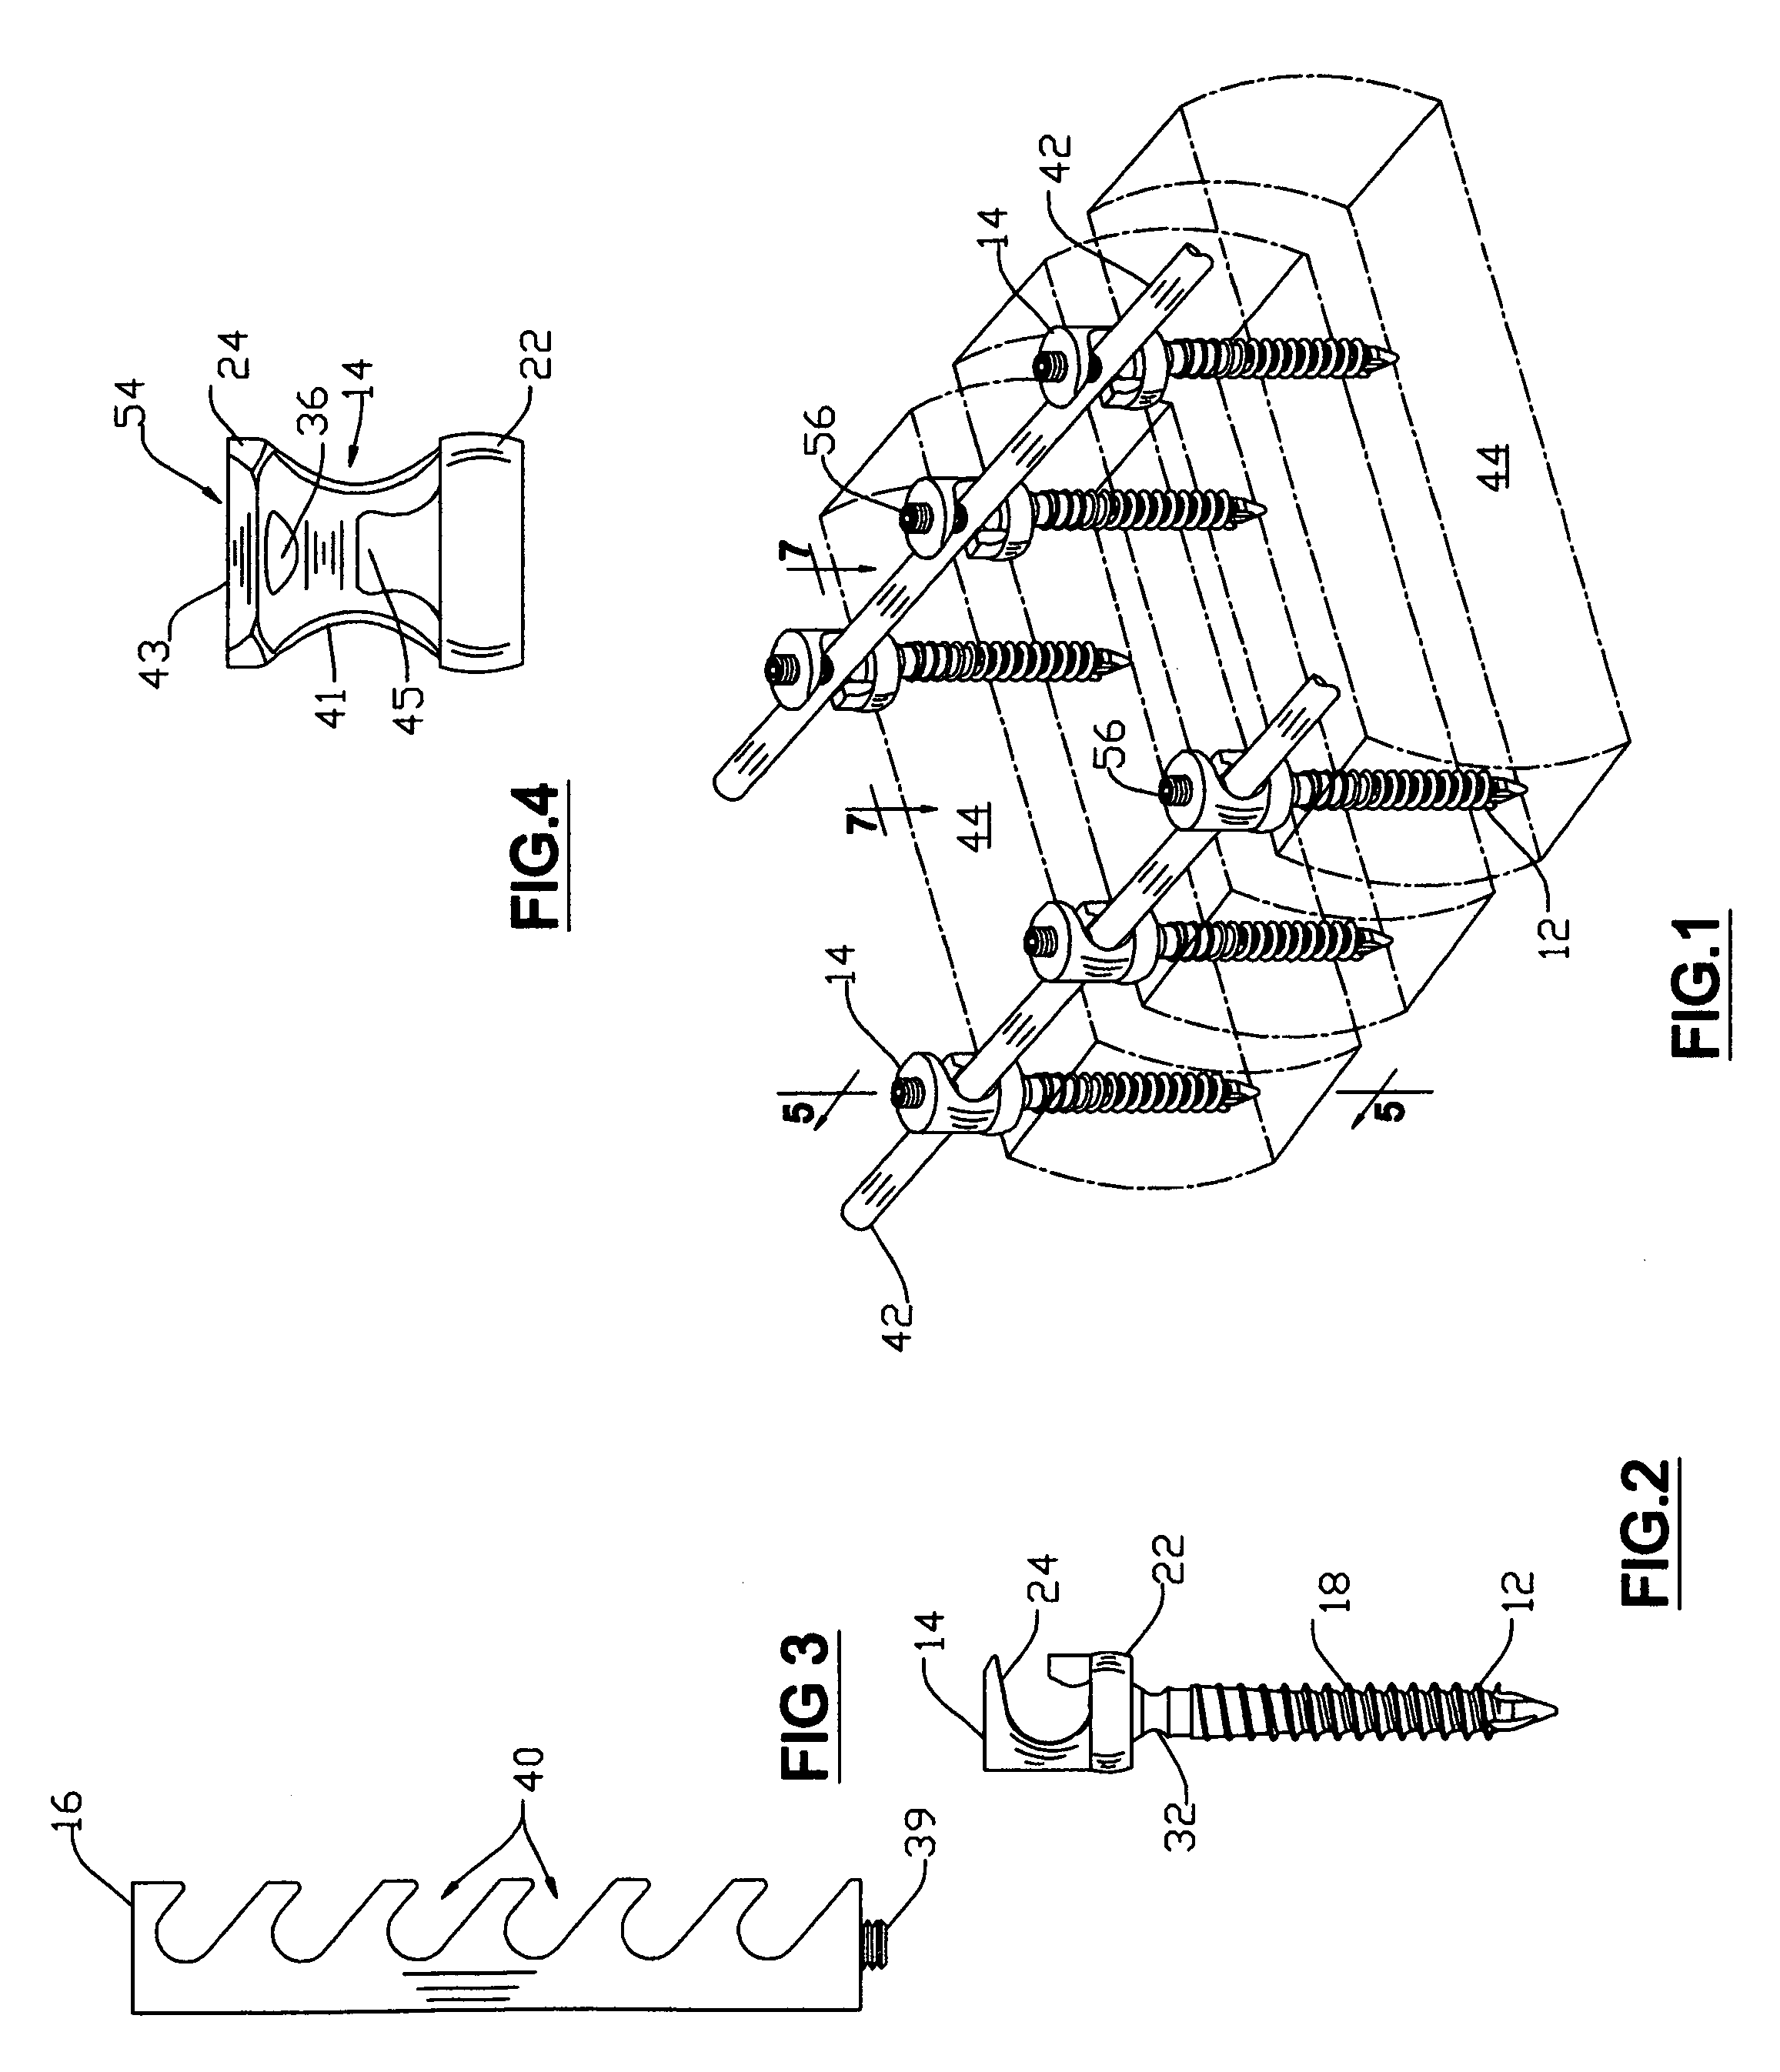 Apparatus ans method for aligning and/or stabilizing the spine